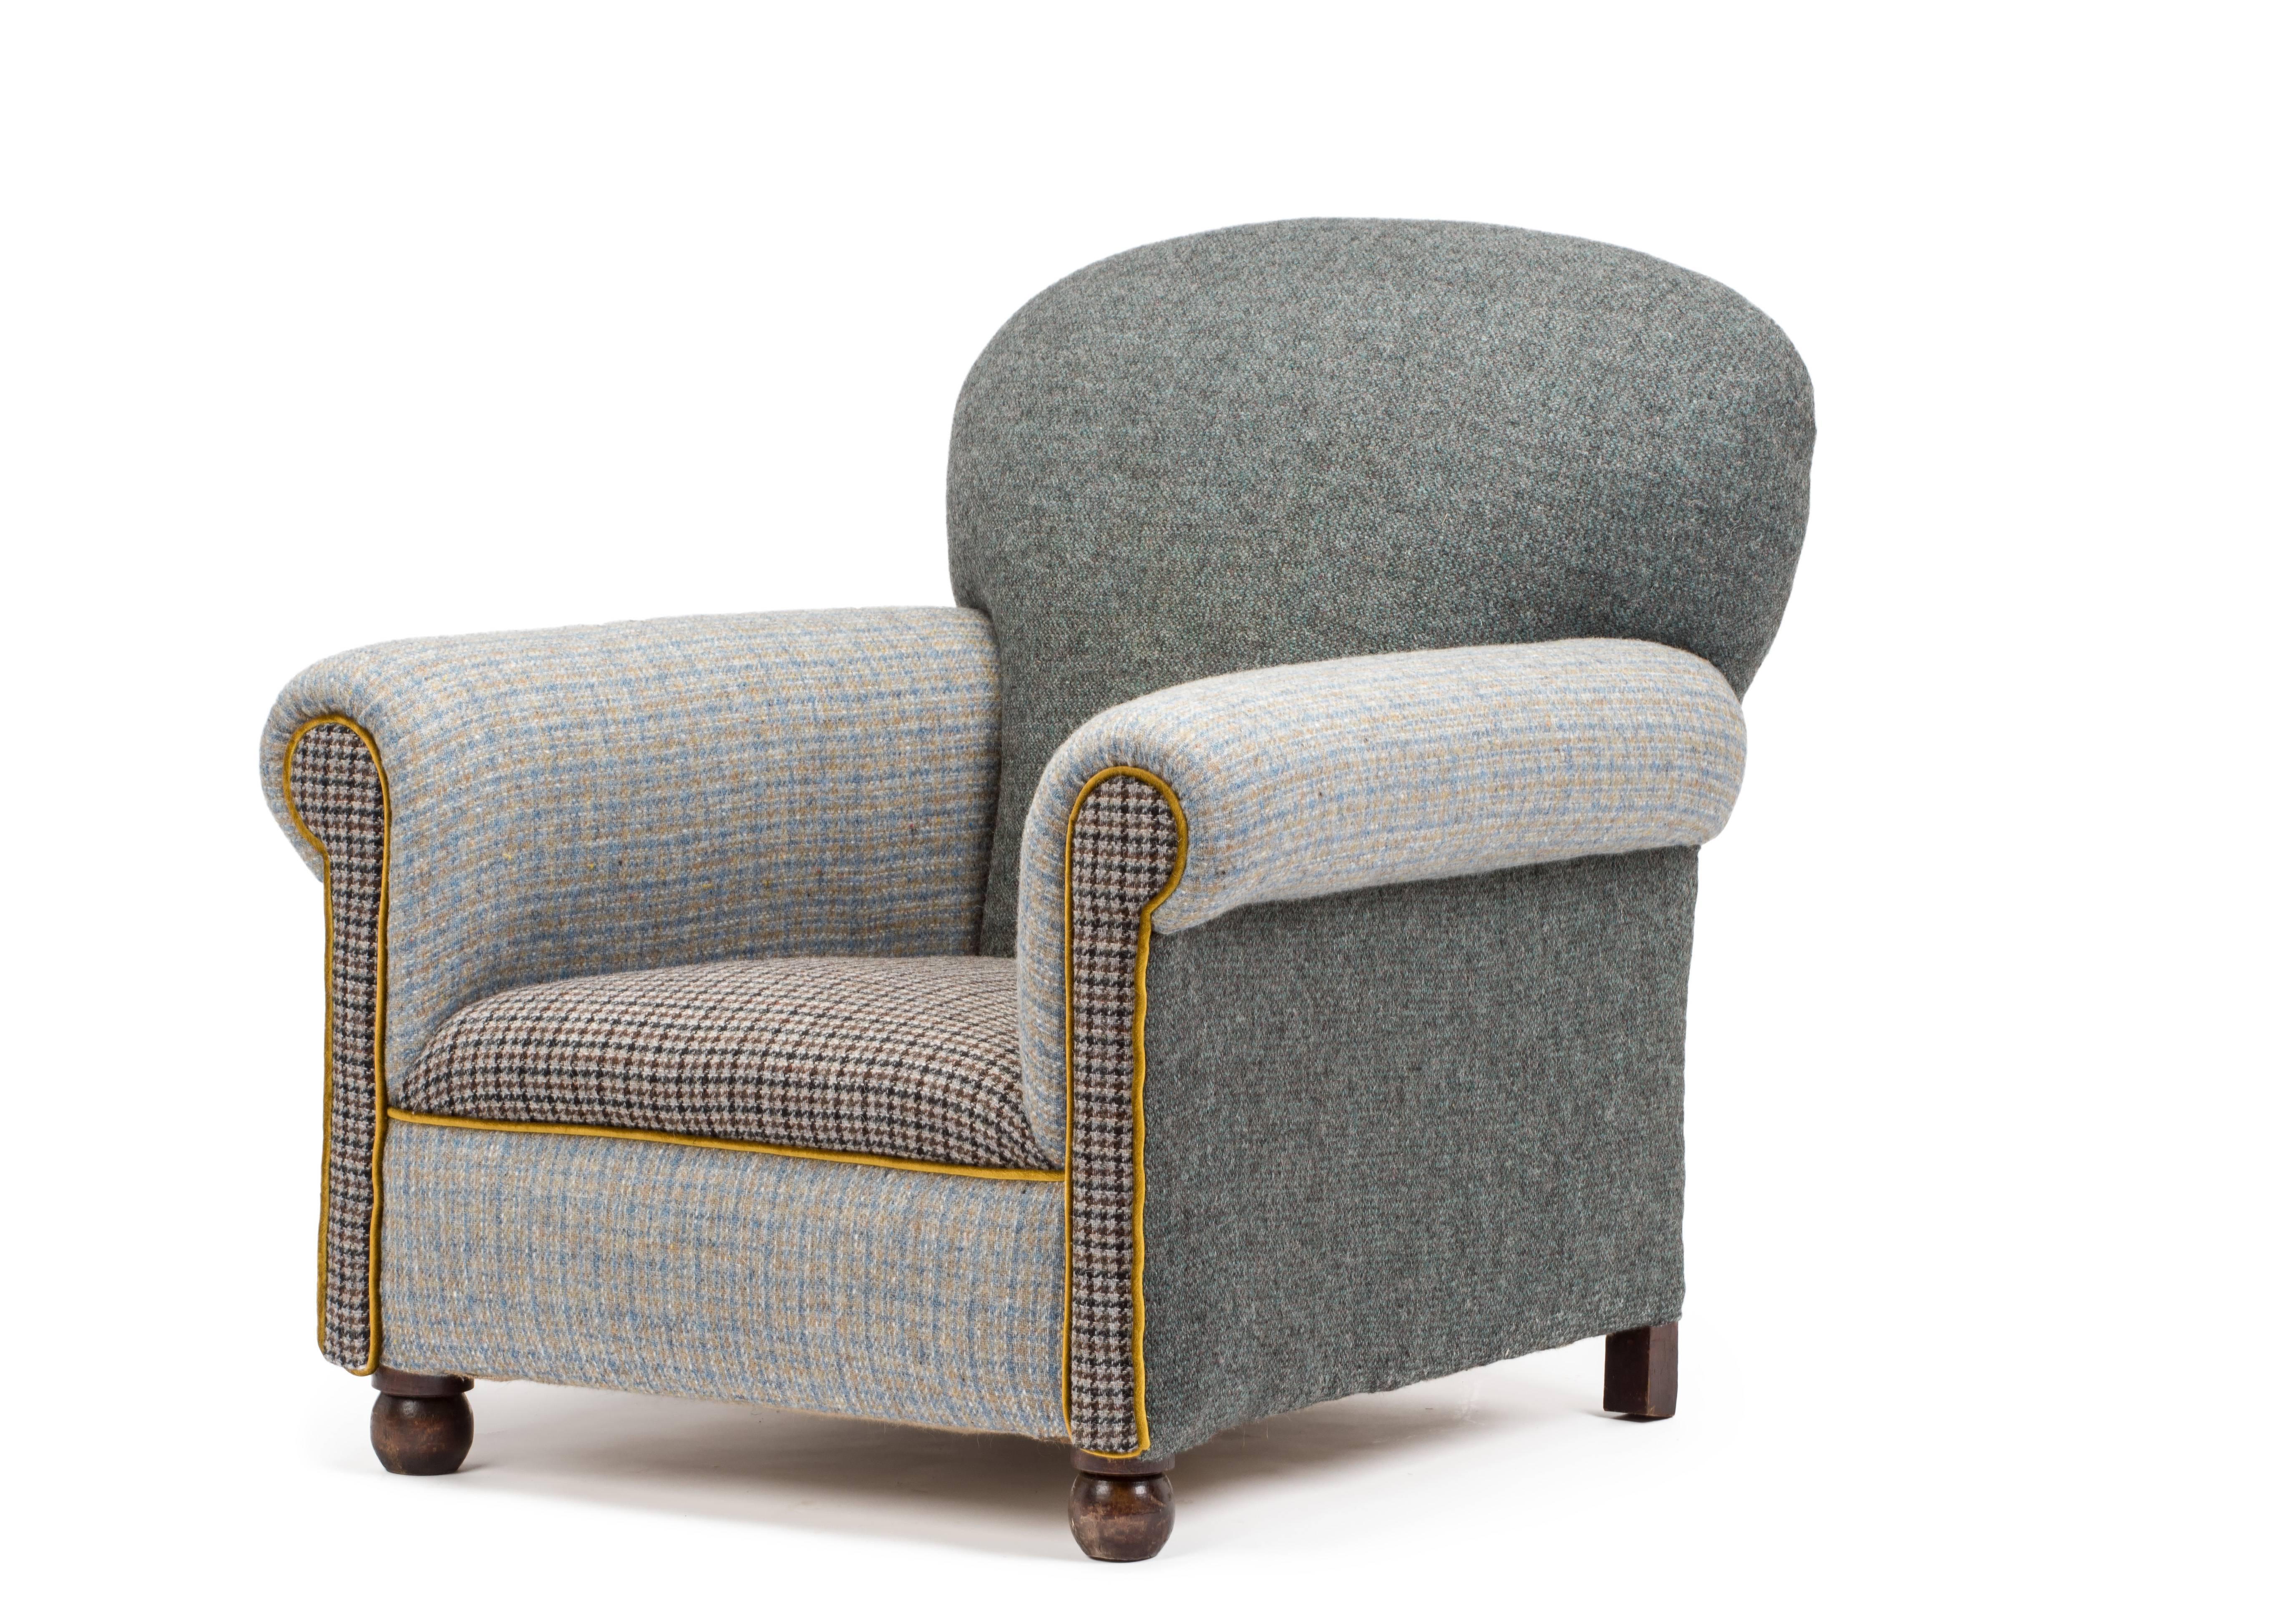 Stylish and unusual Victorian club chair traditionally reupholstered in a cocktail of Harris Tweed with acid yellow piped accent.

Resting on original bun feet.

Complete with a pair of matching scatters cushions.

Finished off with the